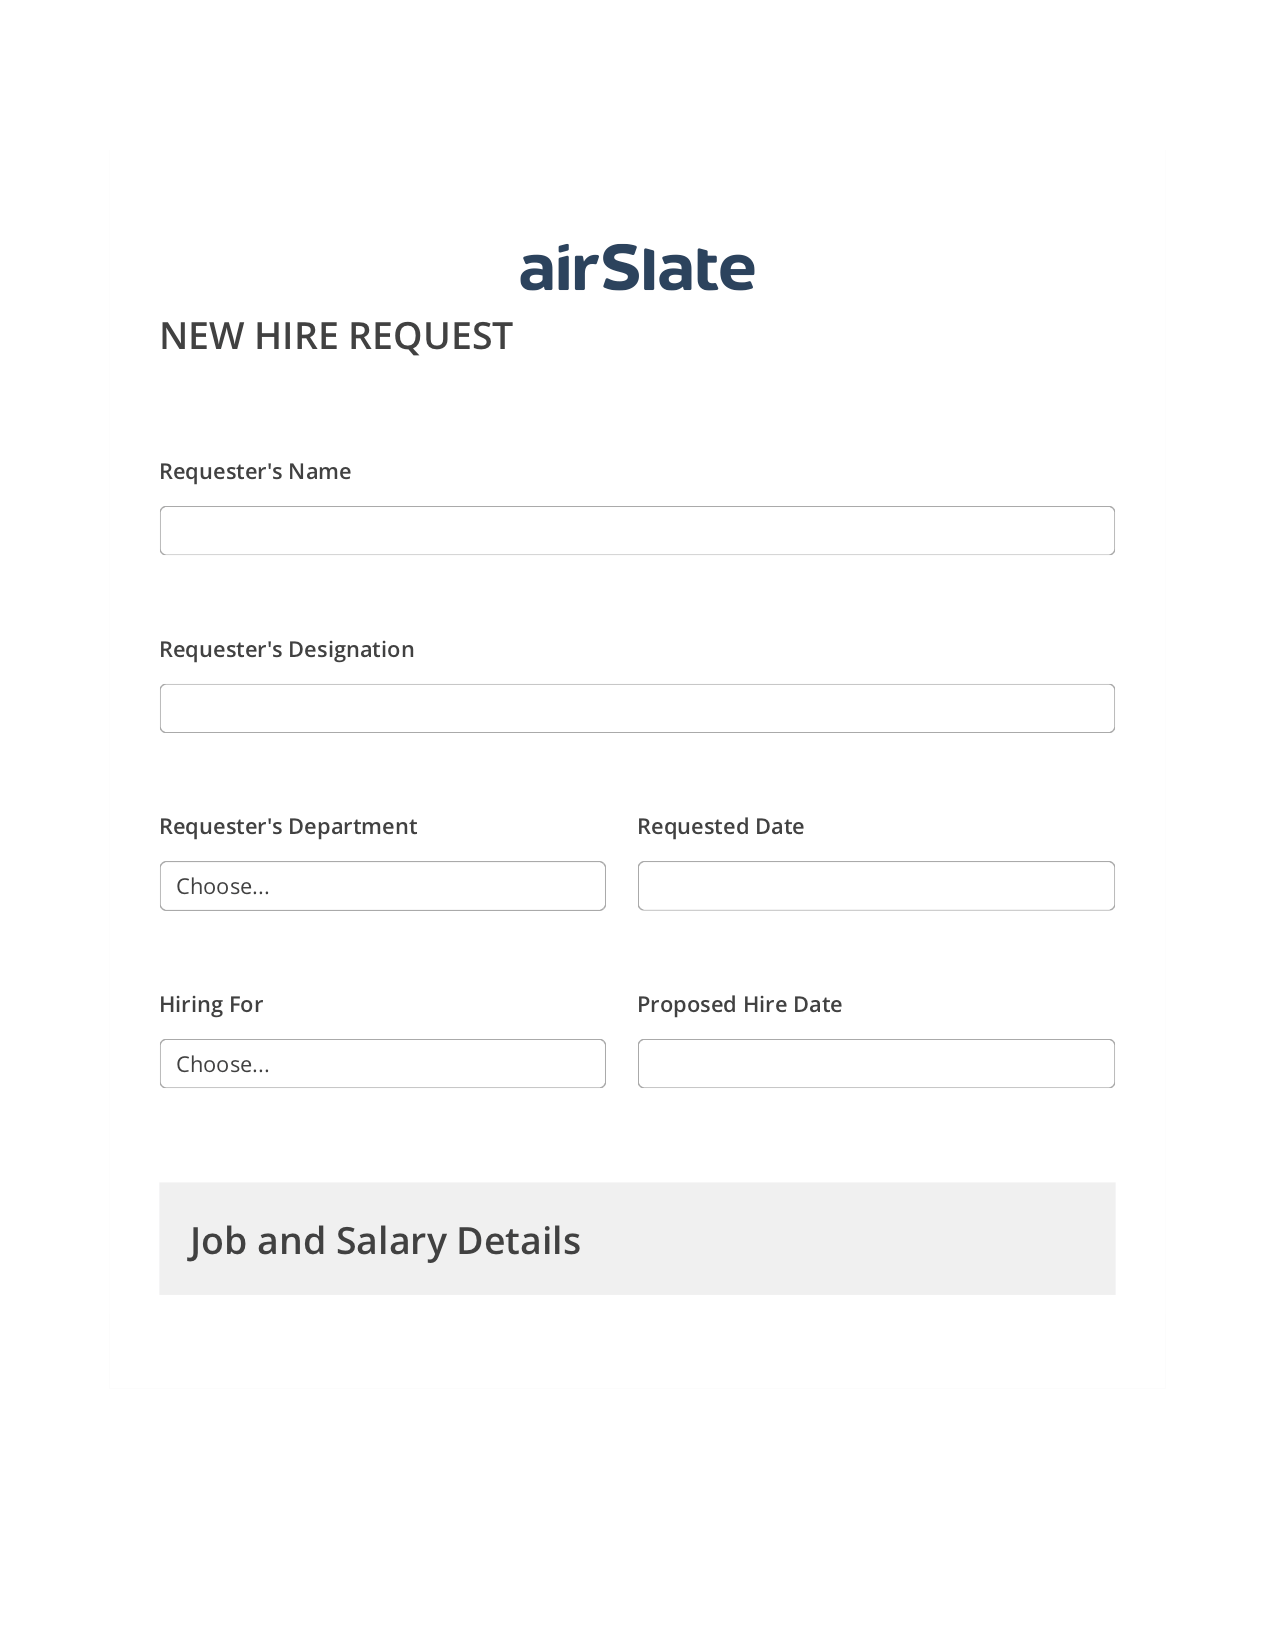 Multirole Hiring Request Workflow Pre-fill Document Bot, Hide Signatures Bot, Archive to Box Bot